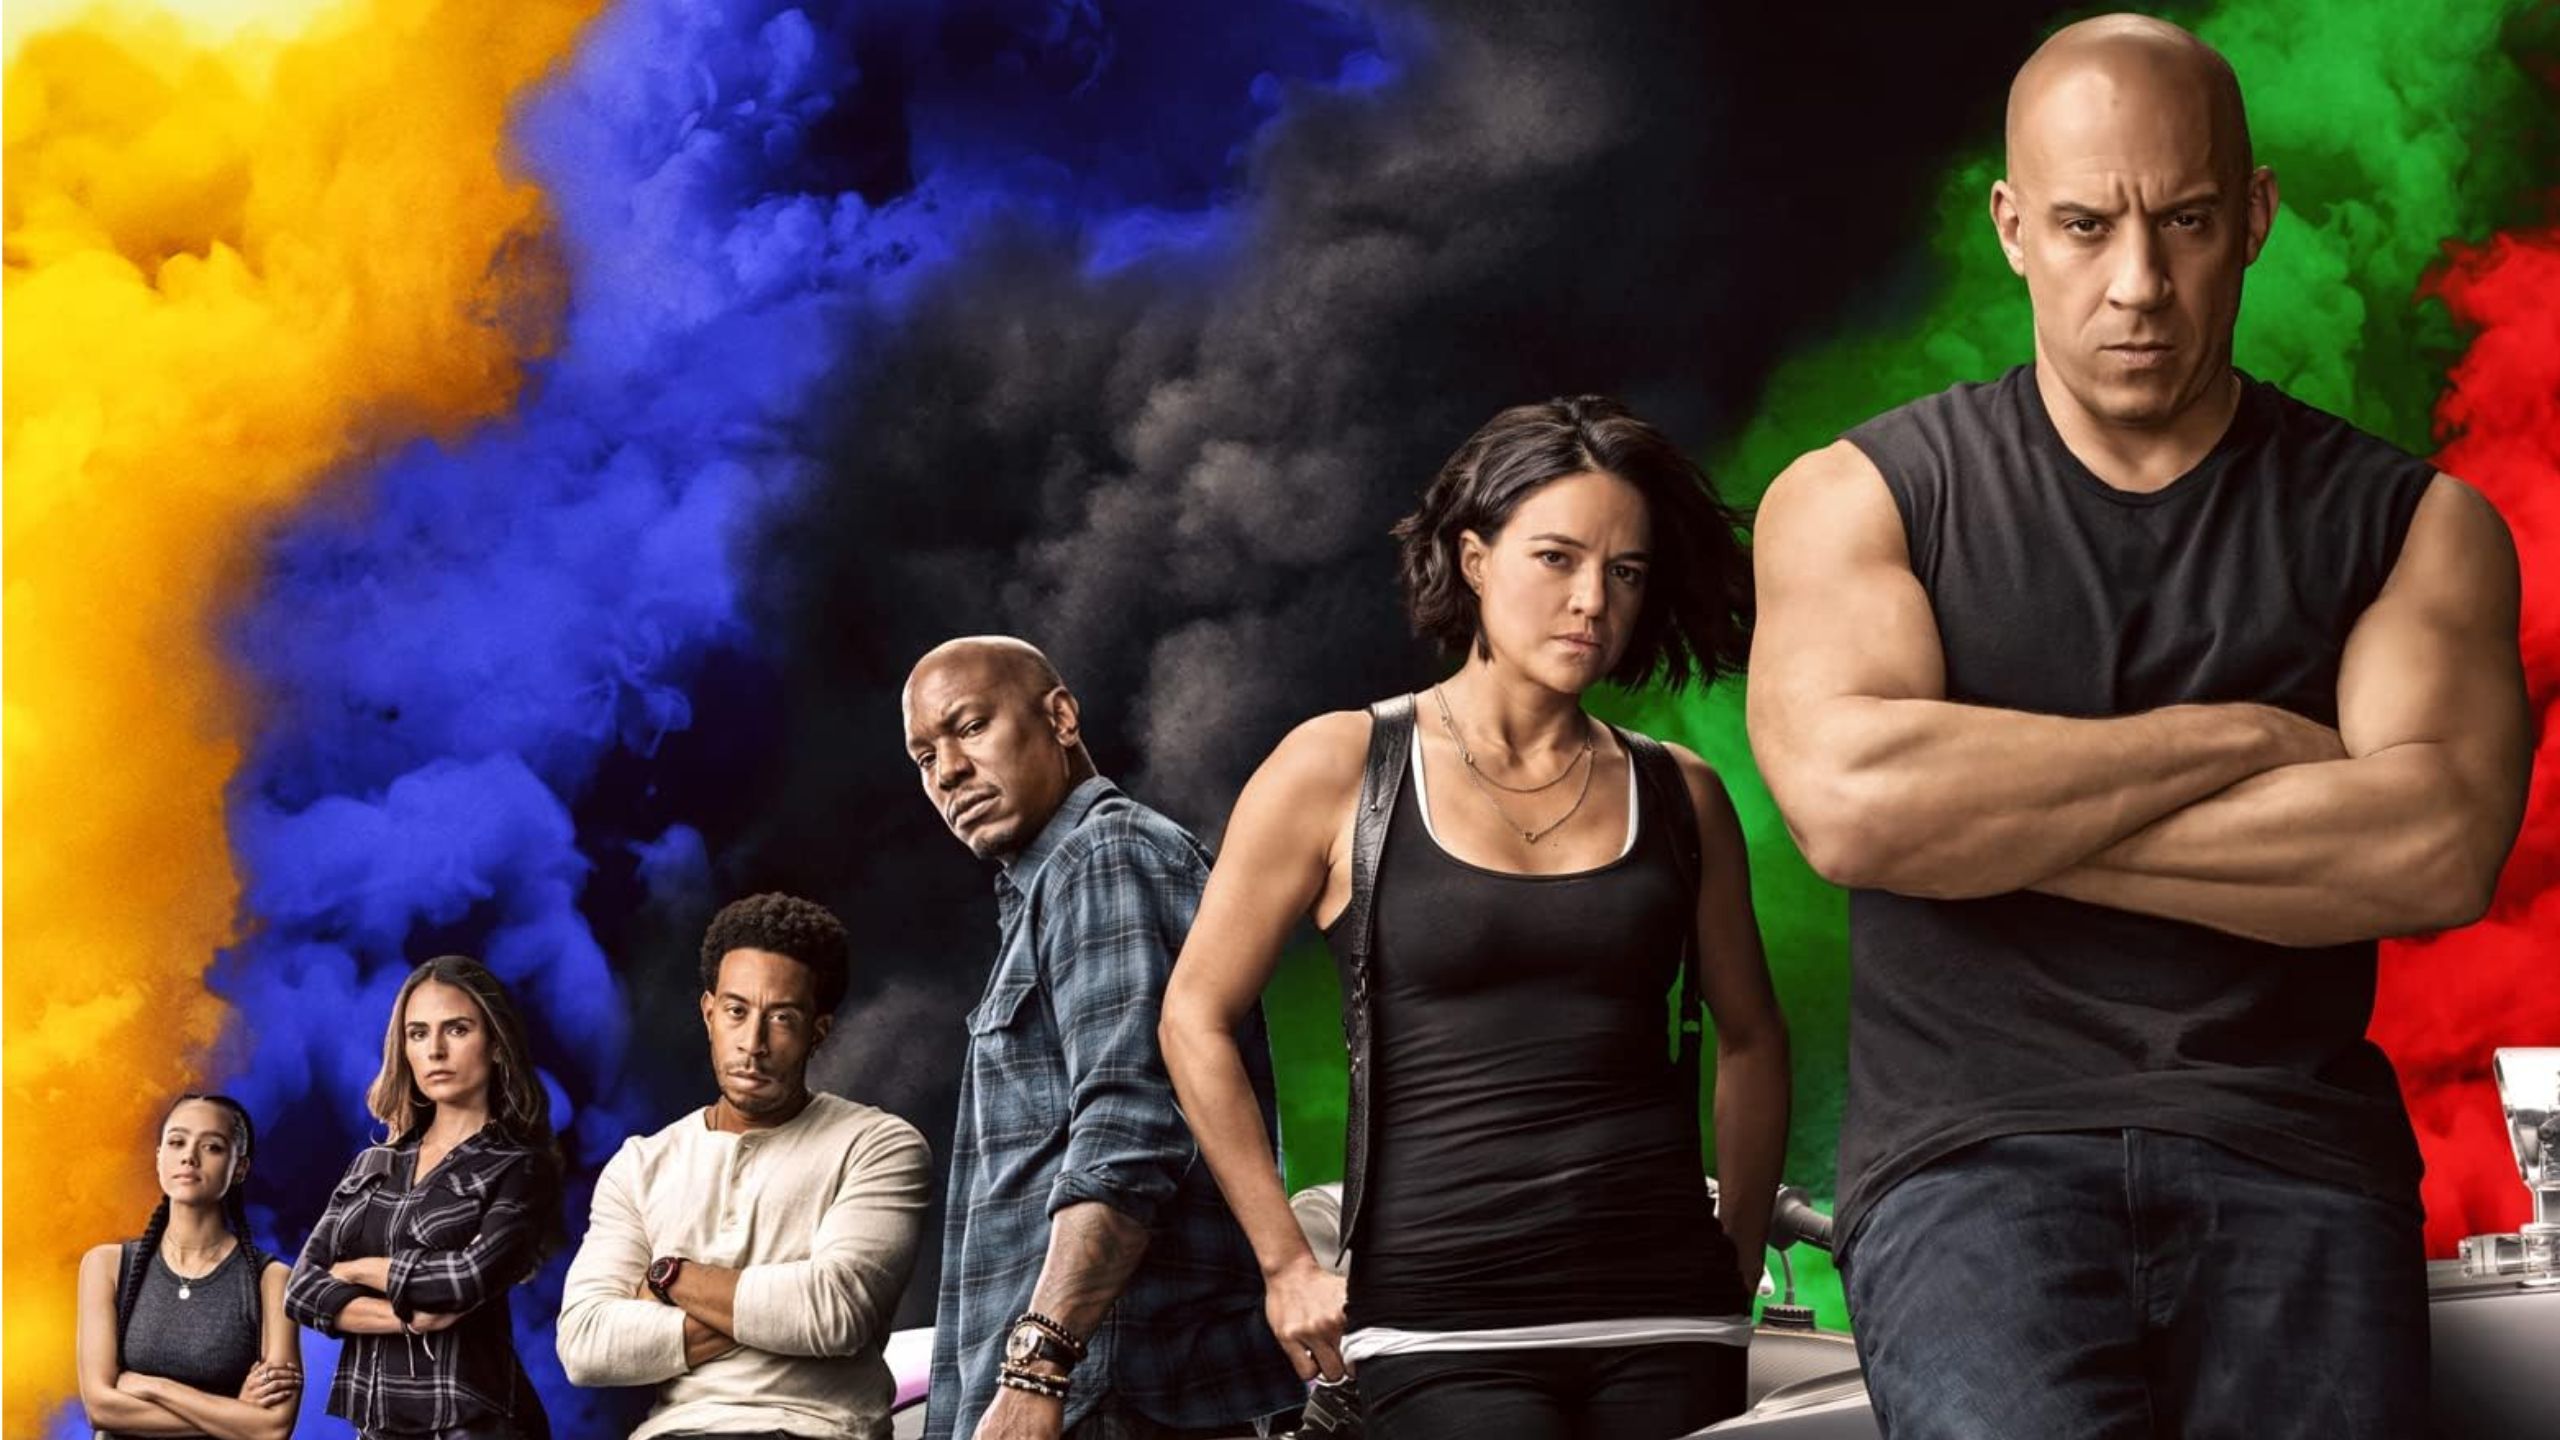 The fast and furious gang with colored smoke behind them.